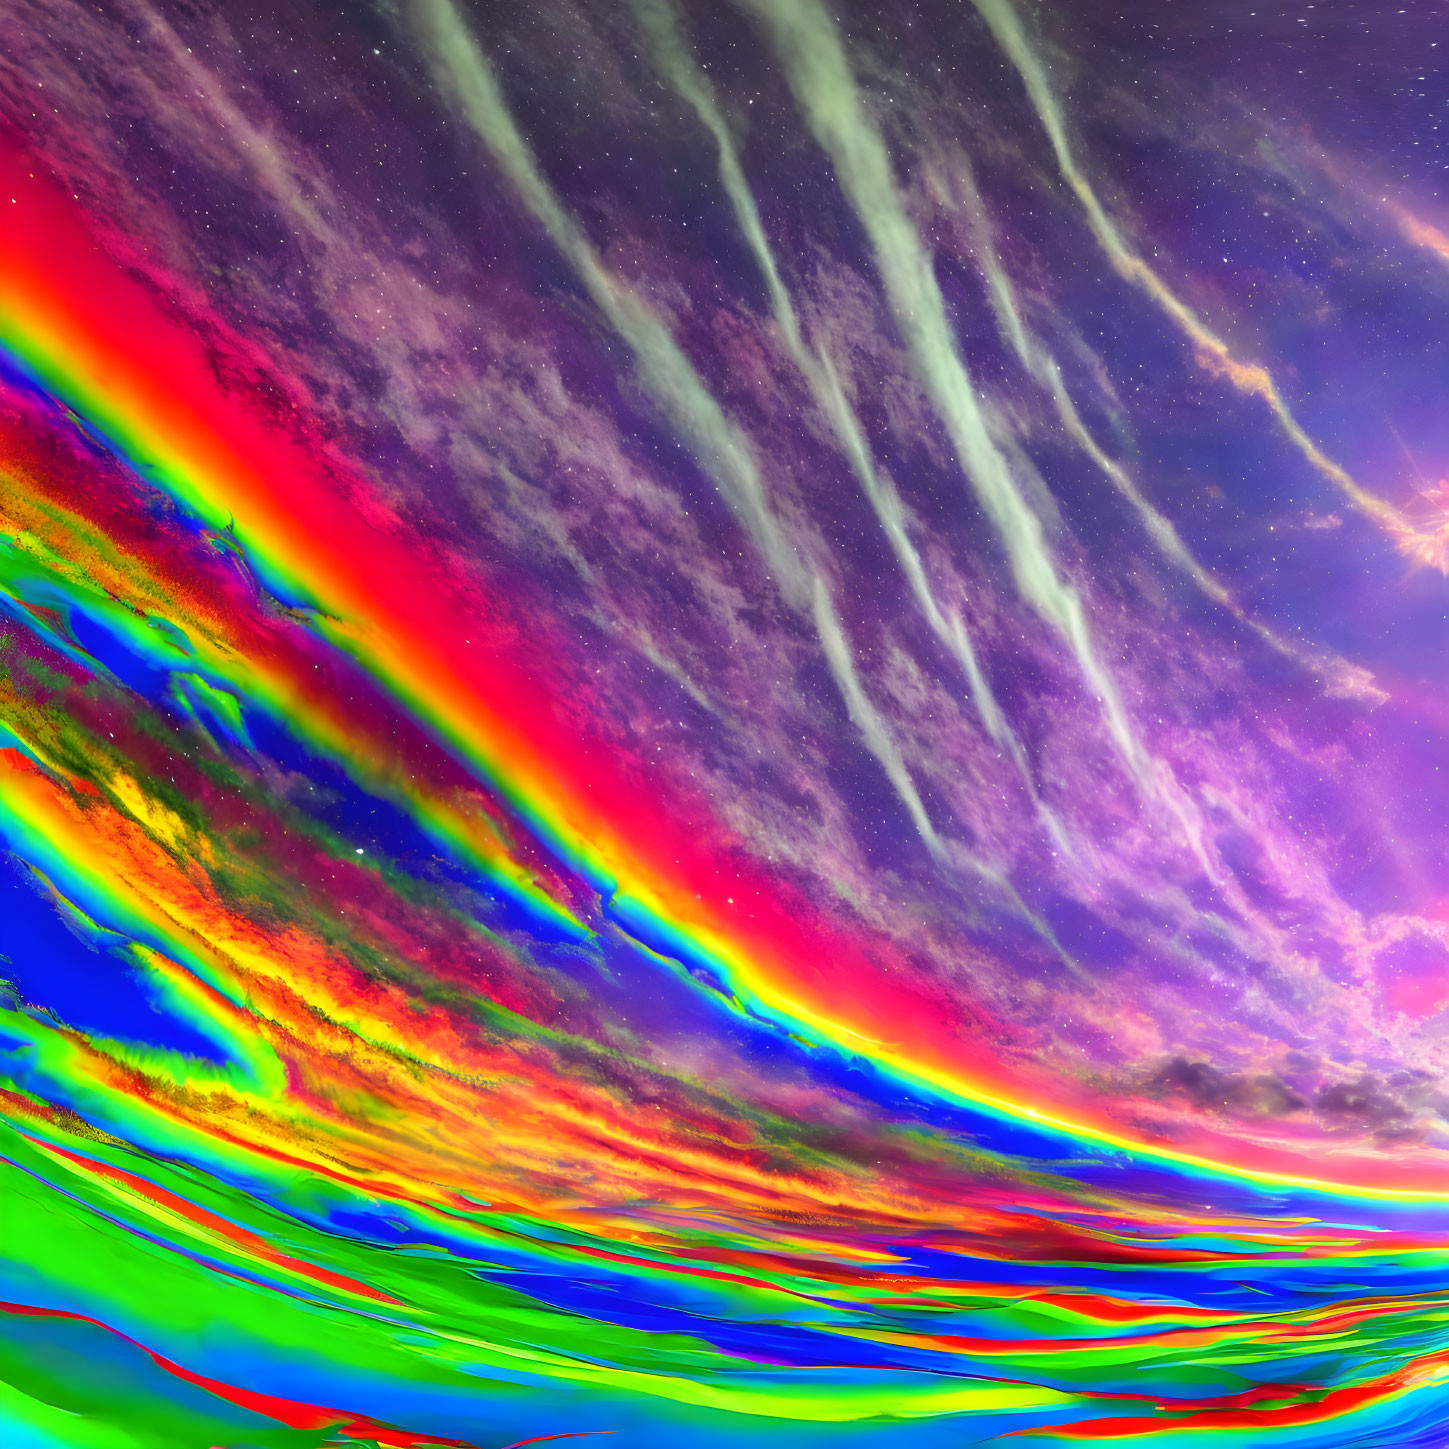 Digitally altered sky with exaggerated rainbow hues and swirling patterns